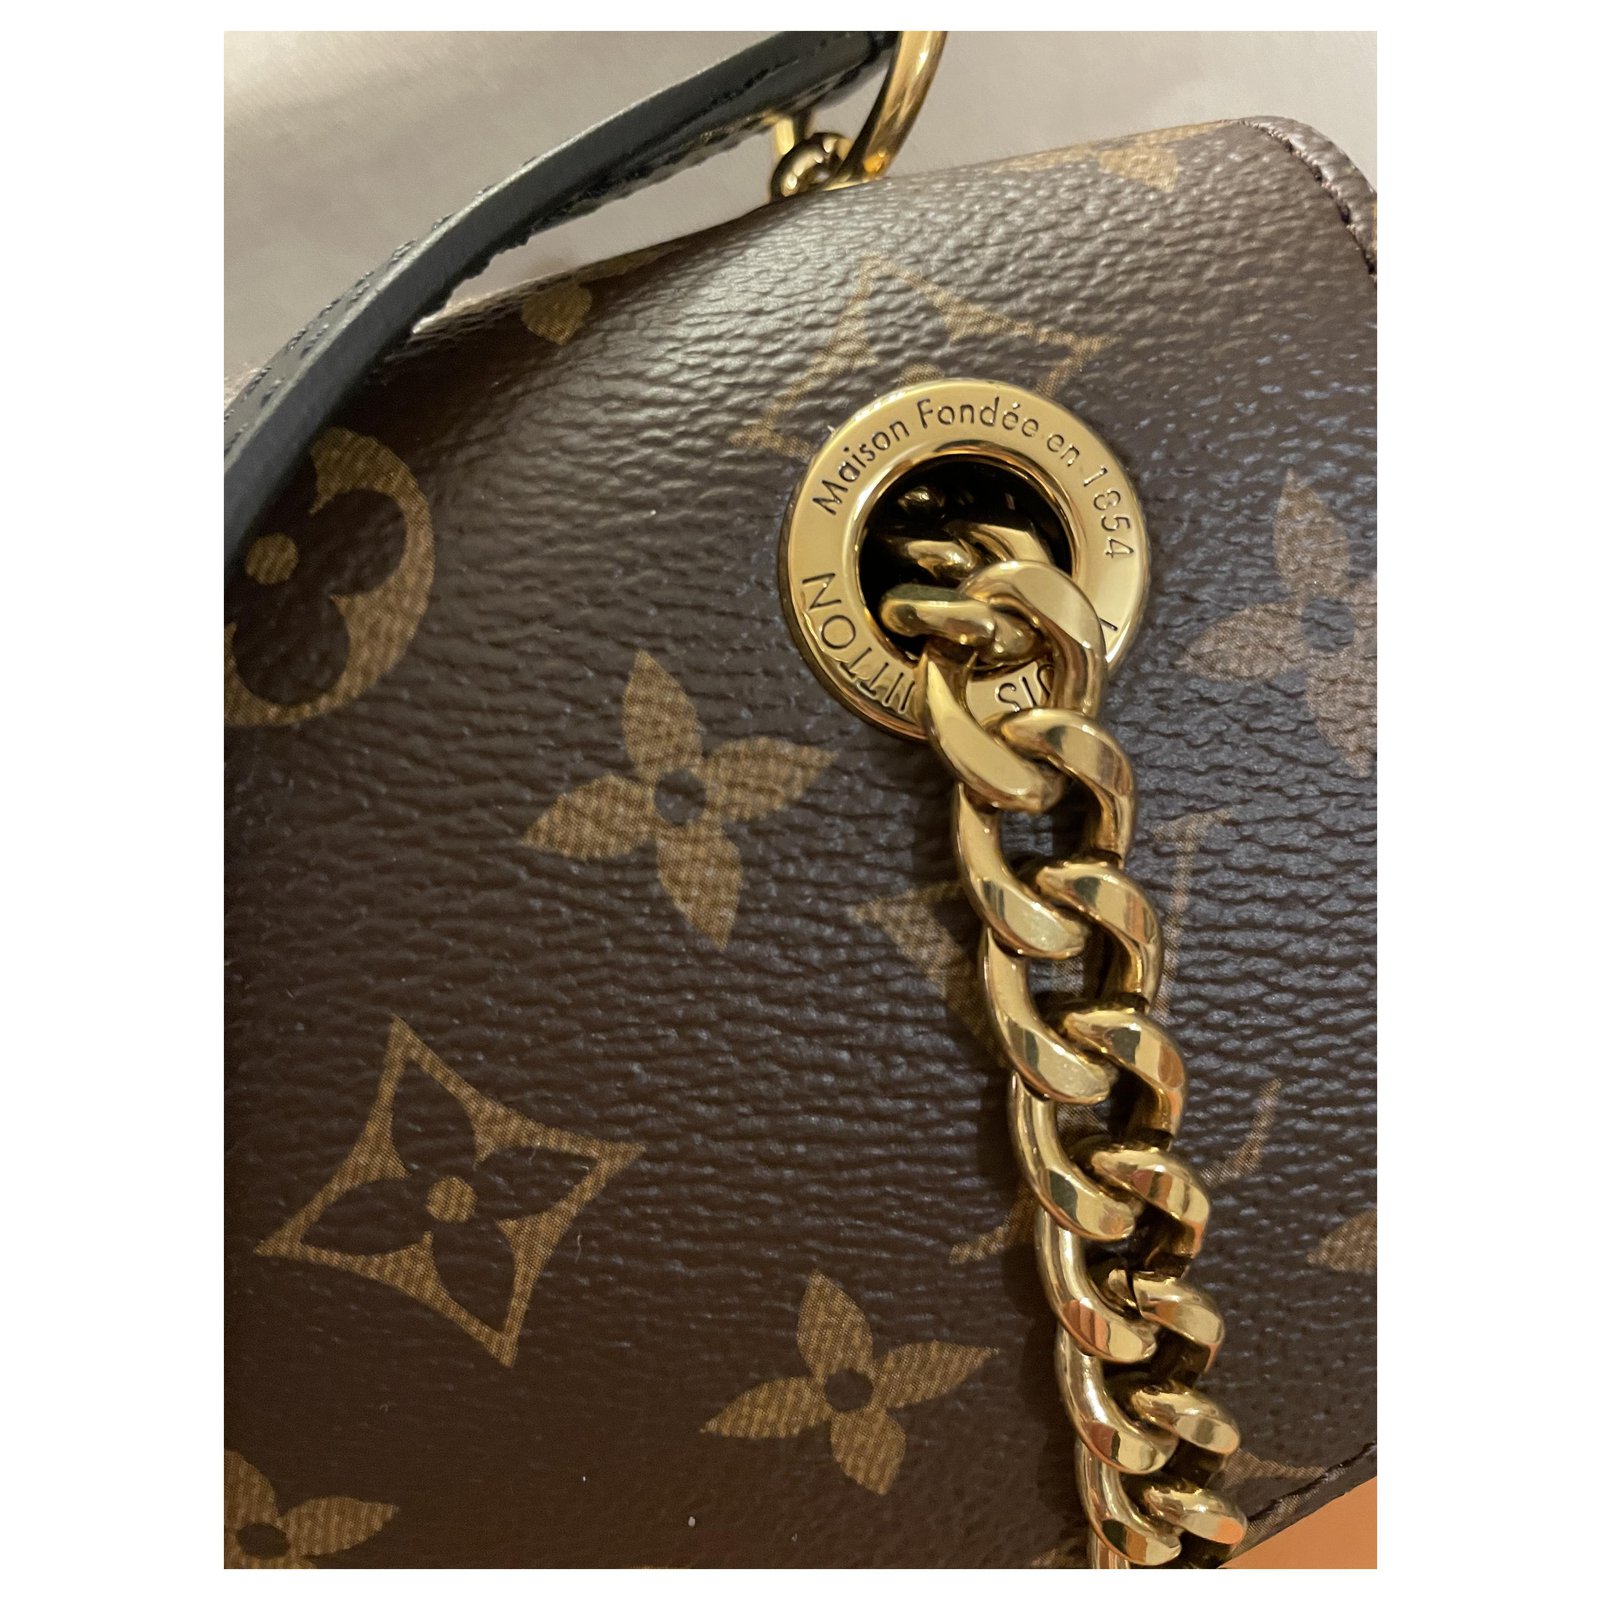 Louis Vuitton passy new chain bag New Brown Cloth ref.262290